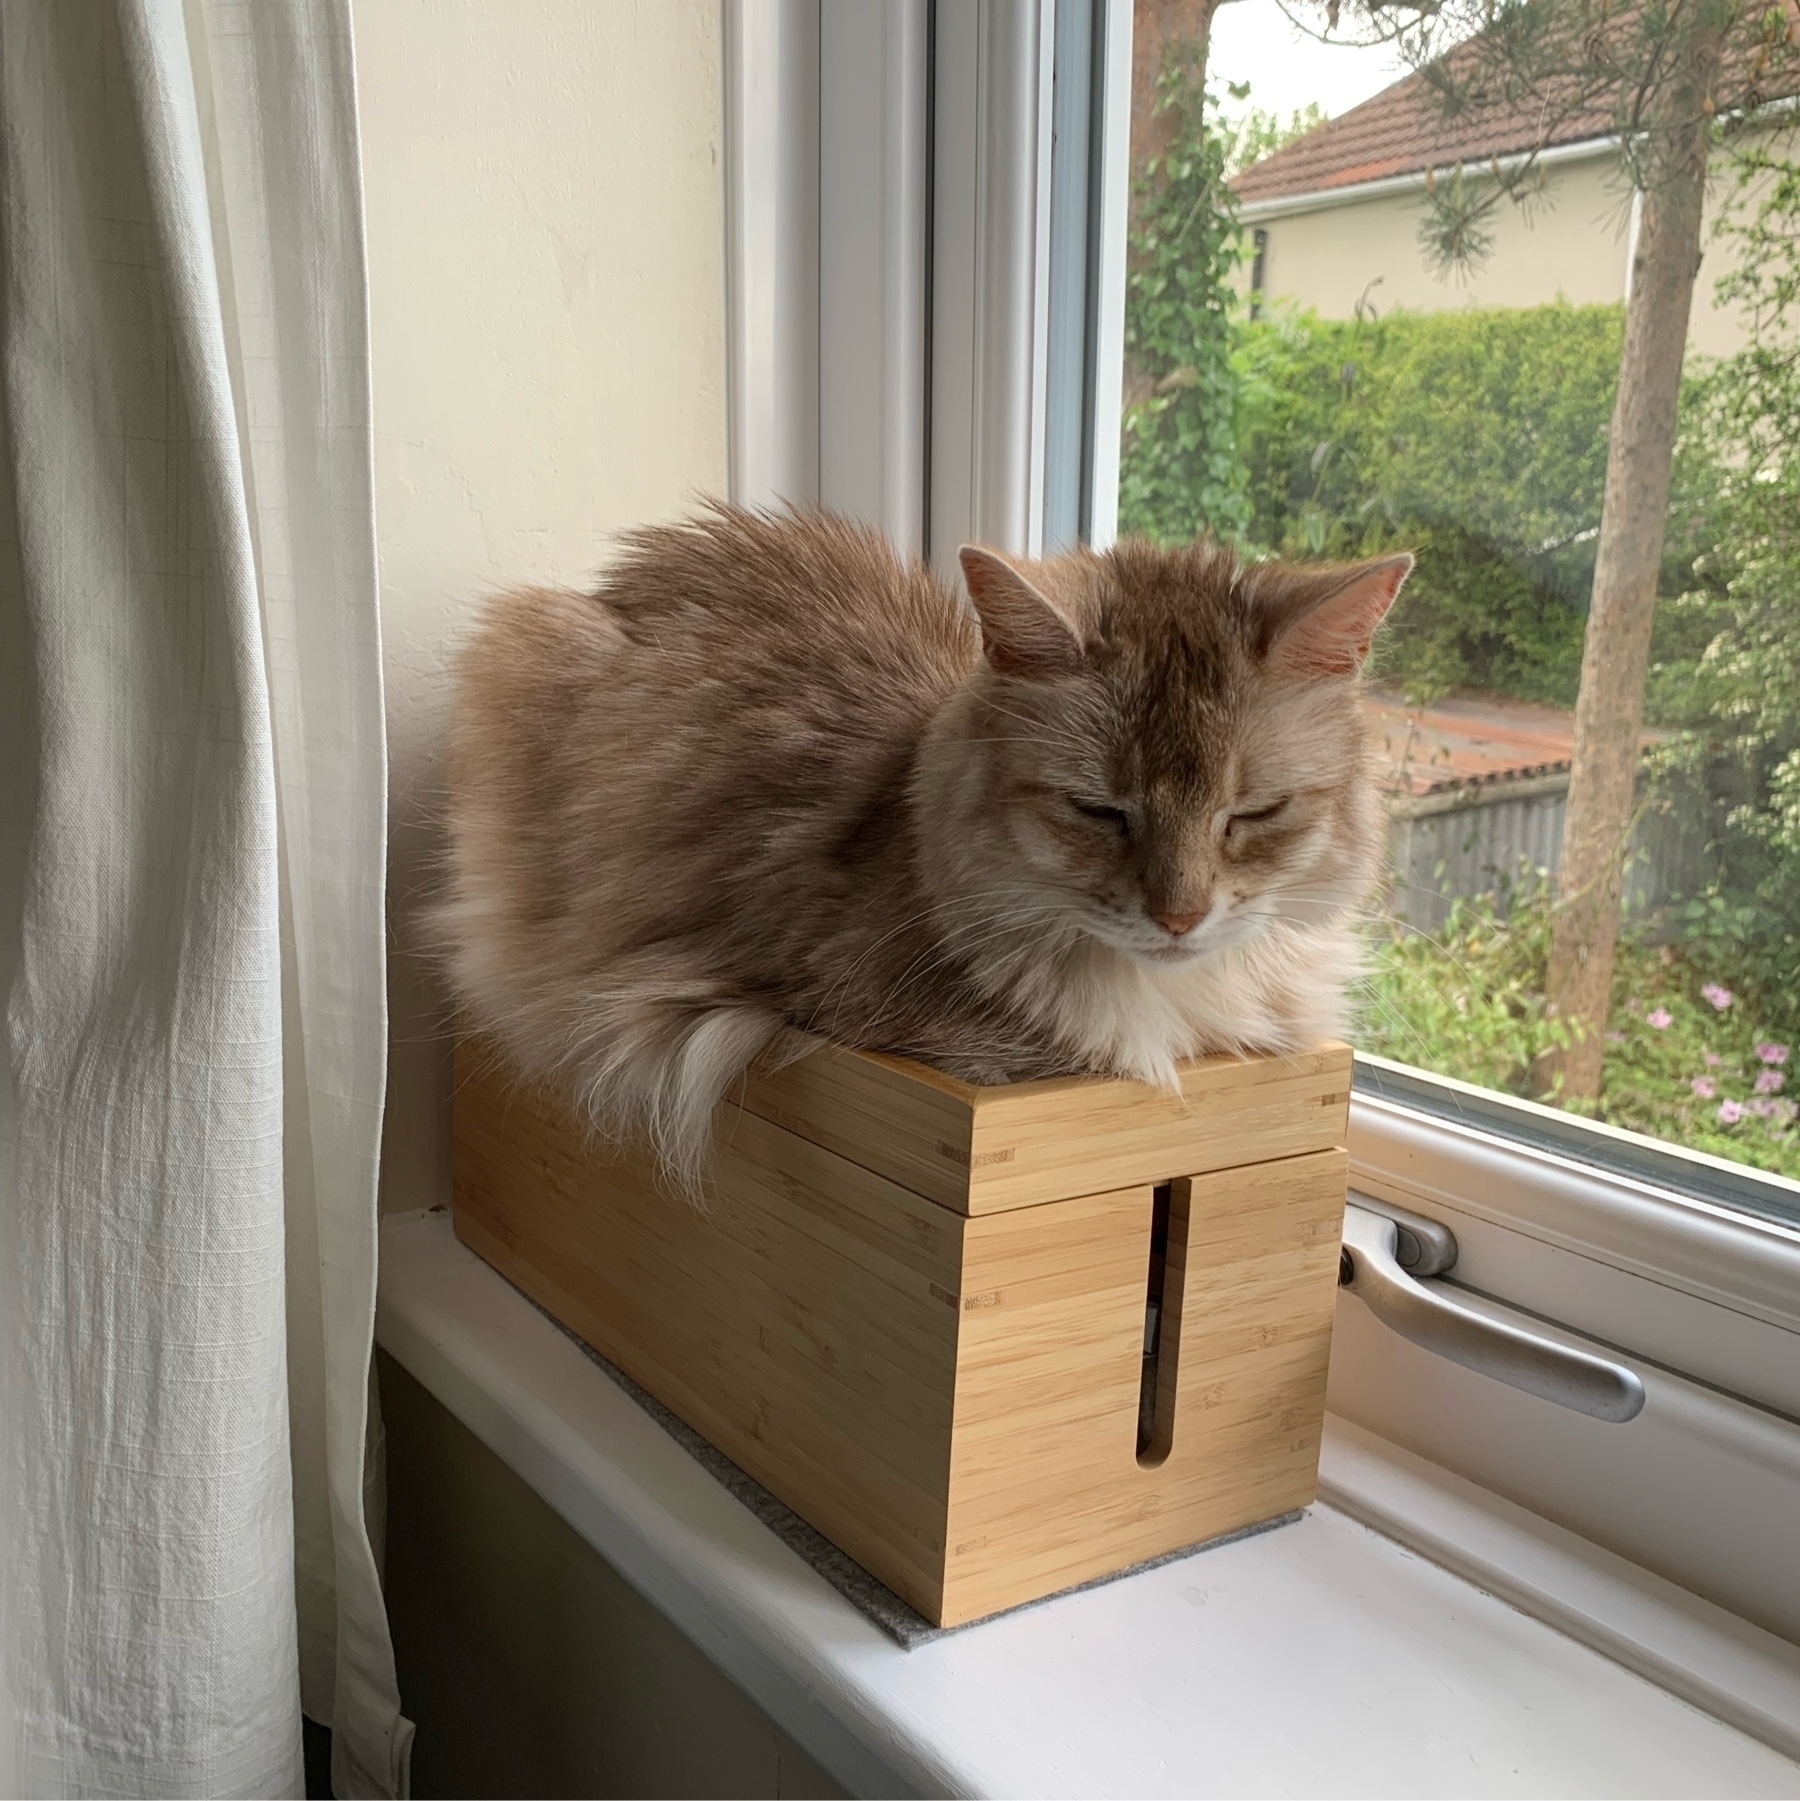 A fluffy pale ginger cat is squeezed into the lid of a wooden office organiser box which is placed on a window sill